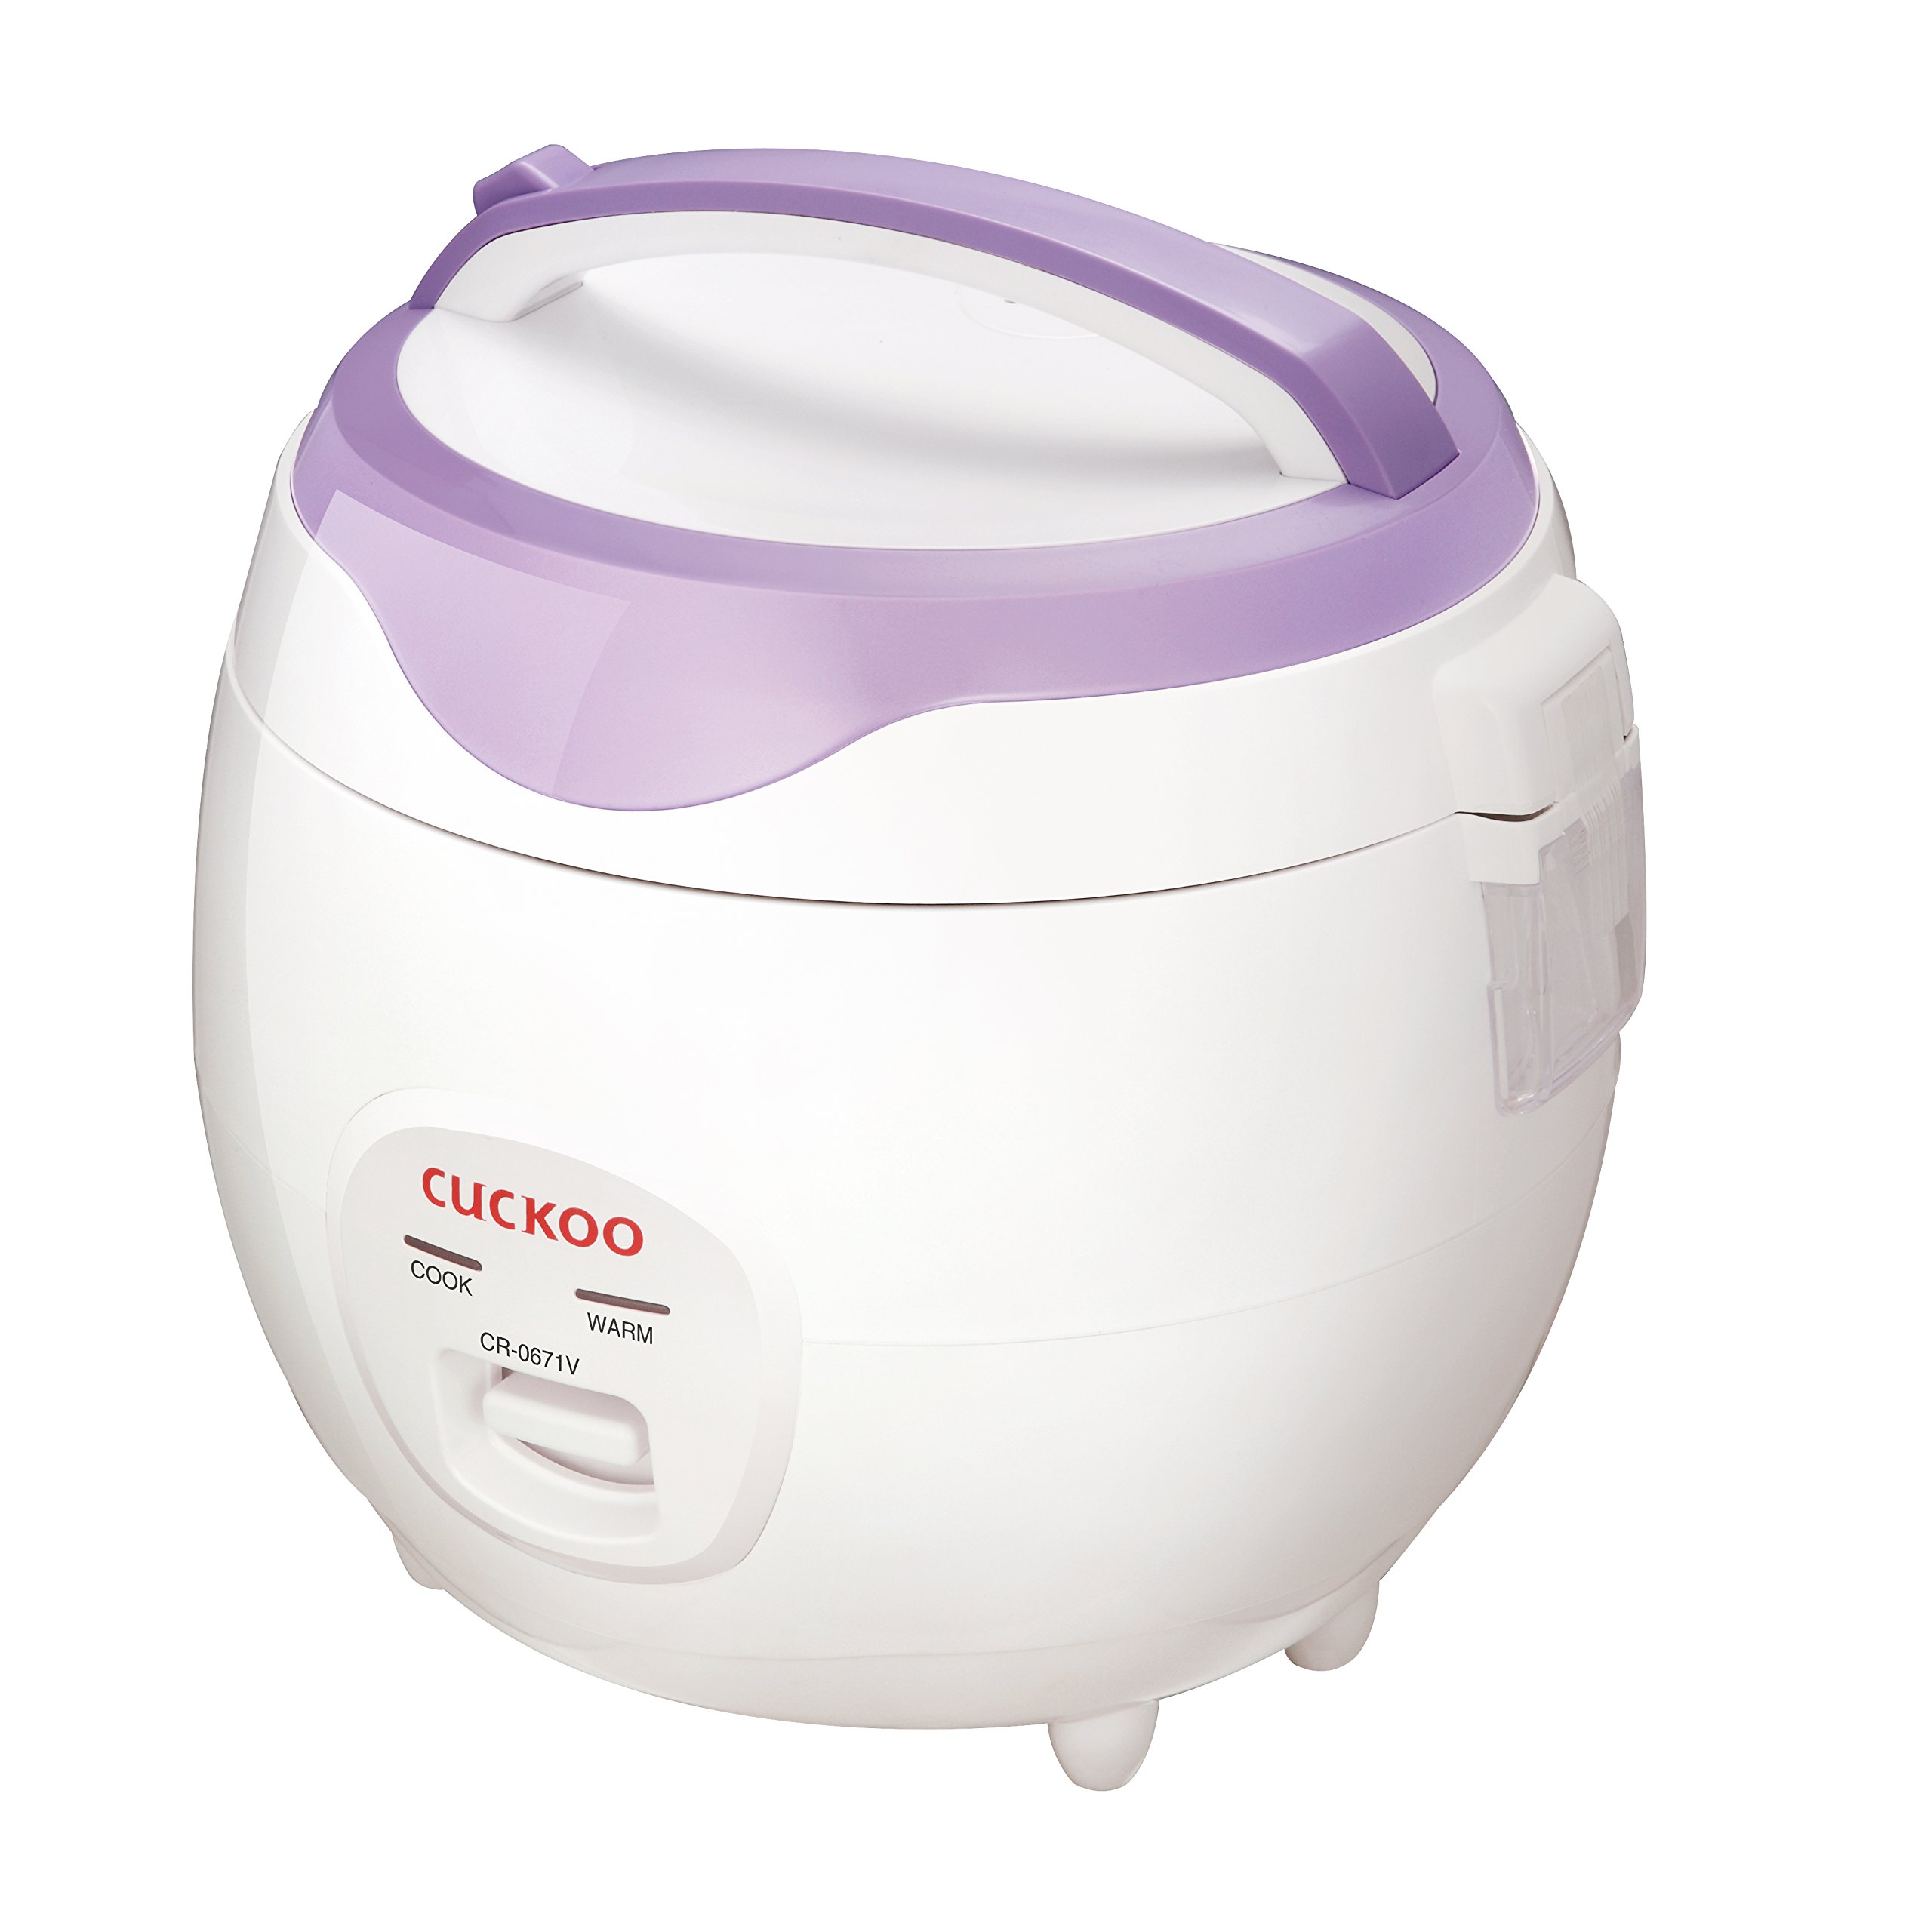 Cuckoo Electric Heating Rice Cooker CR-0671V (Violet/White)